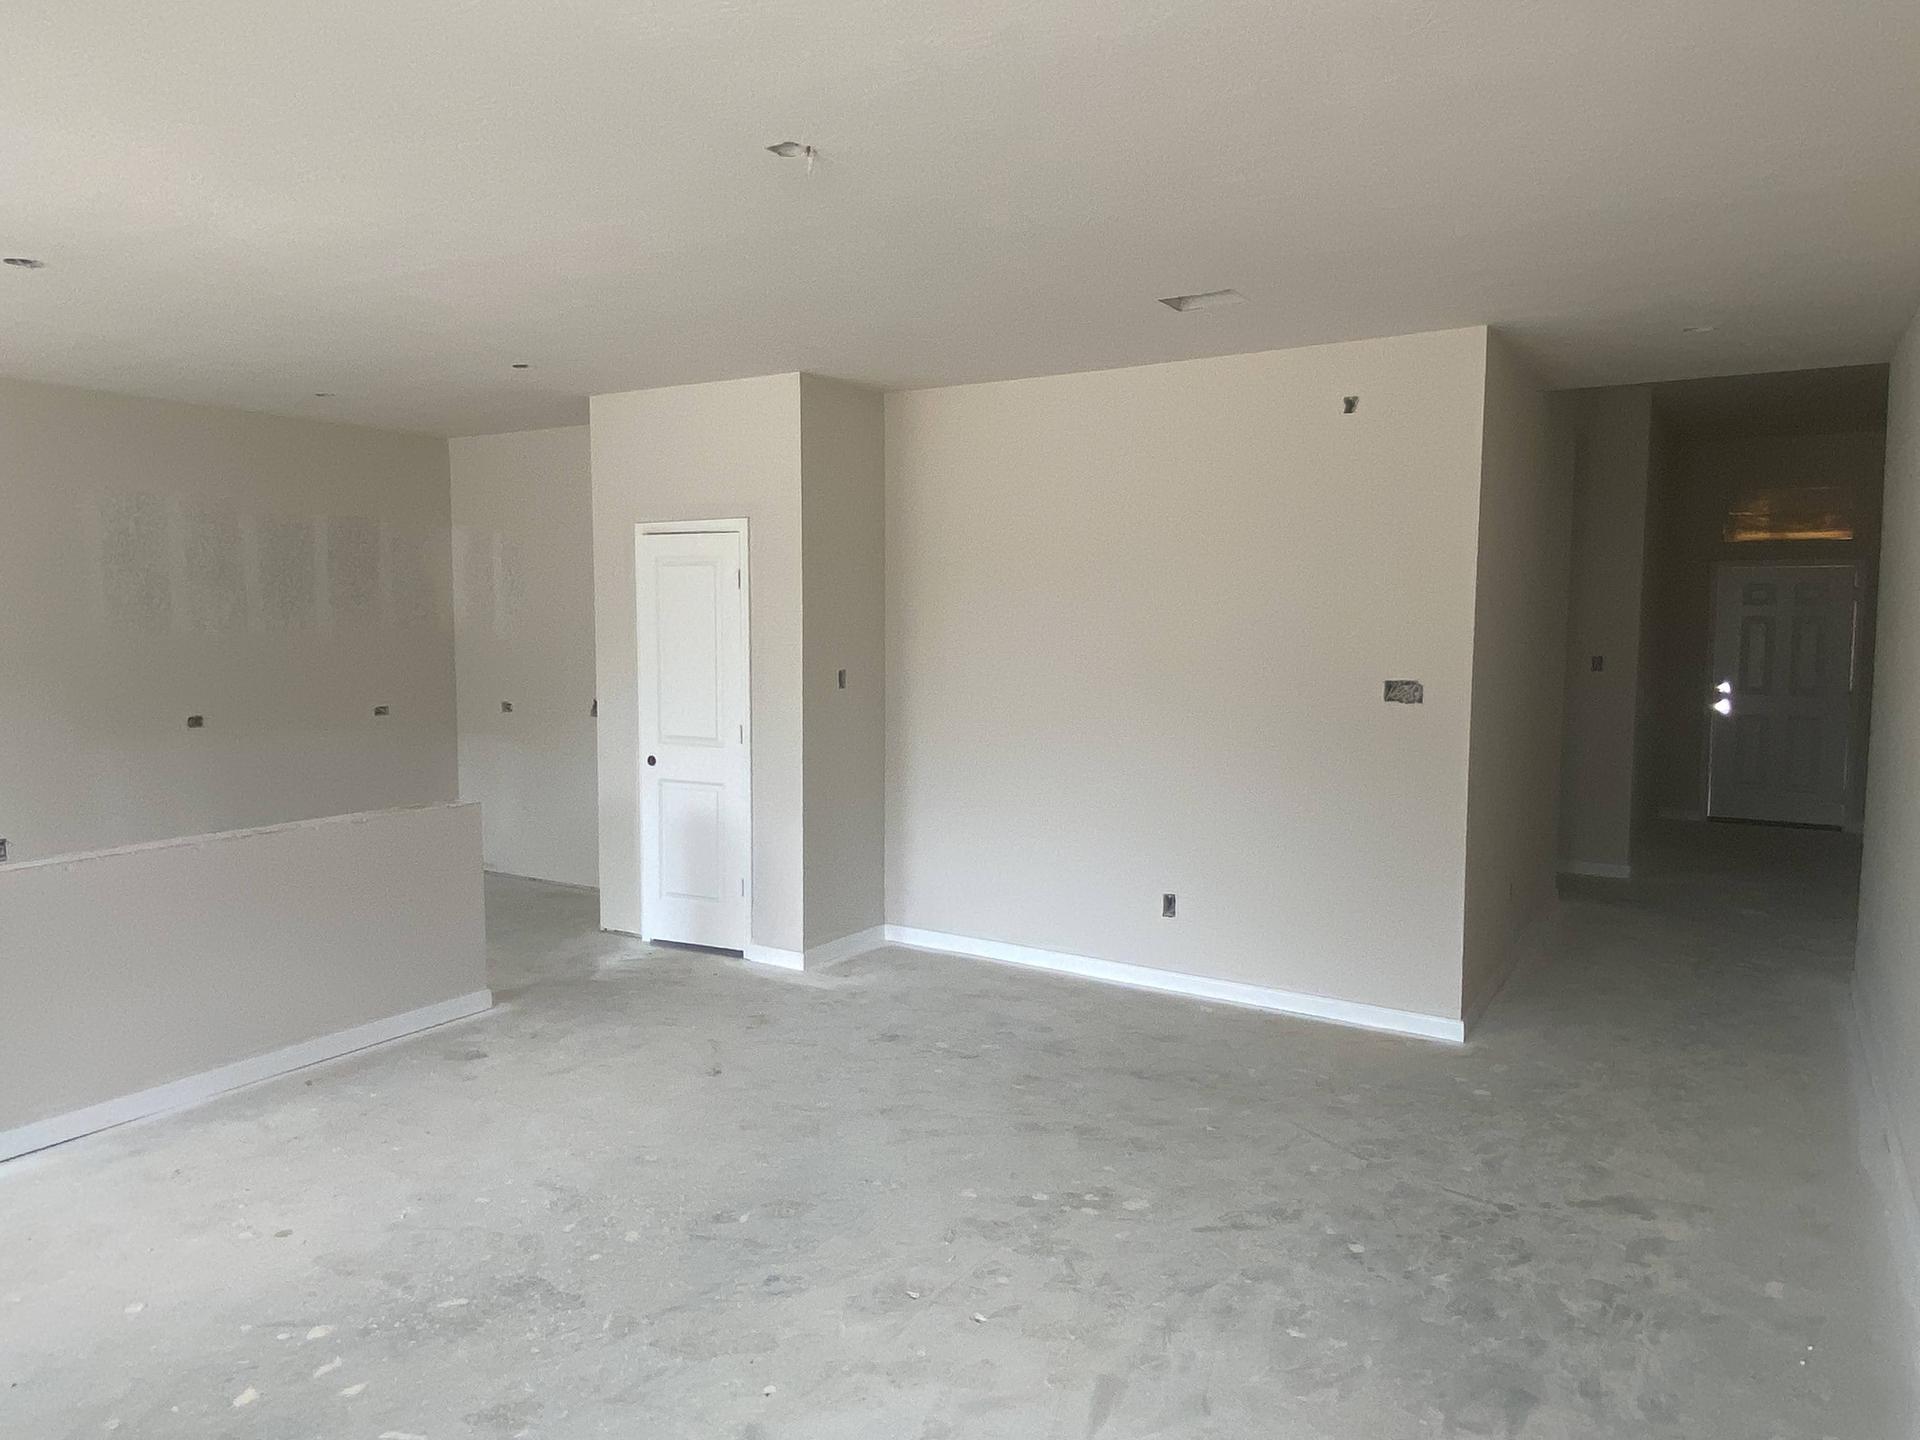 4br New Home in Conroe, TX